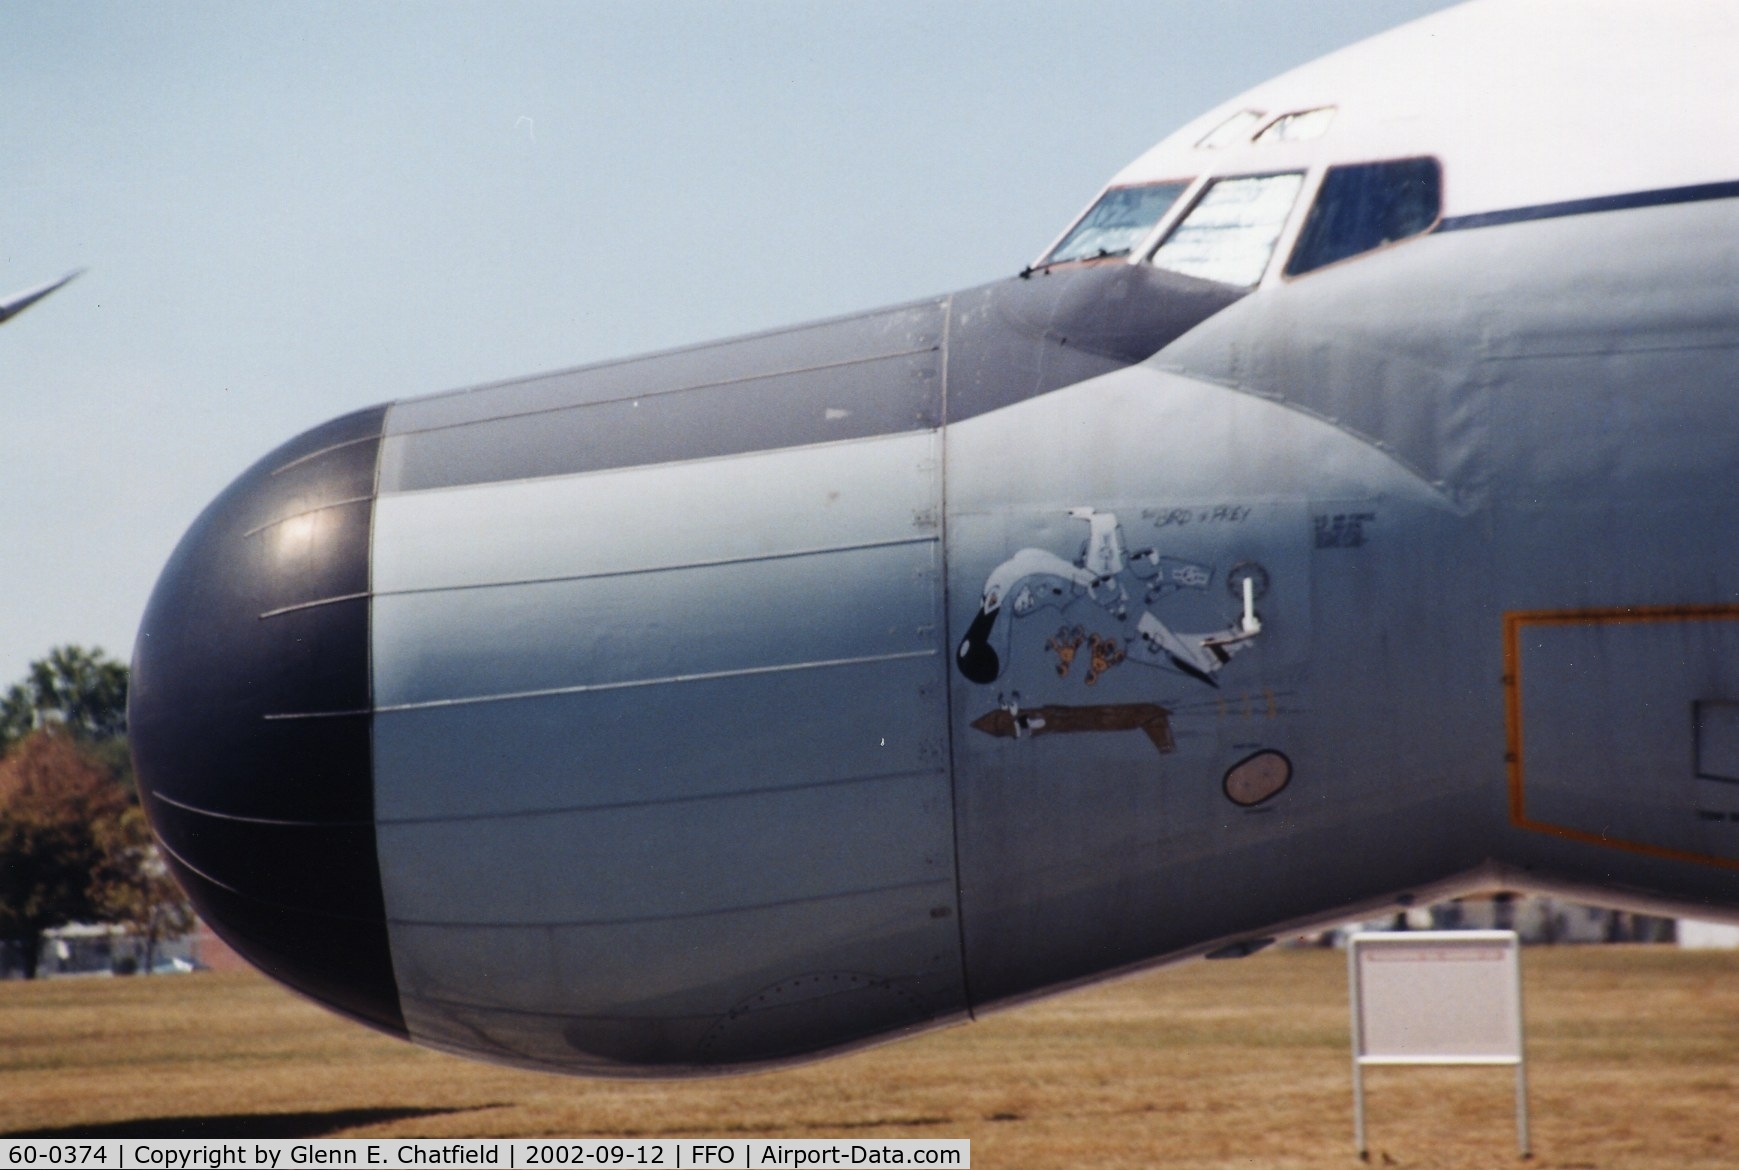 60-0374, 1960 Boeing EC-135N-BN Stratolifter C/N 18149, A droopy nose